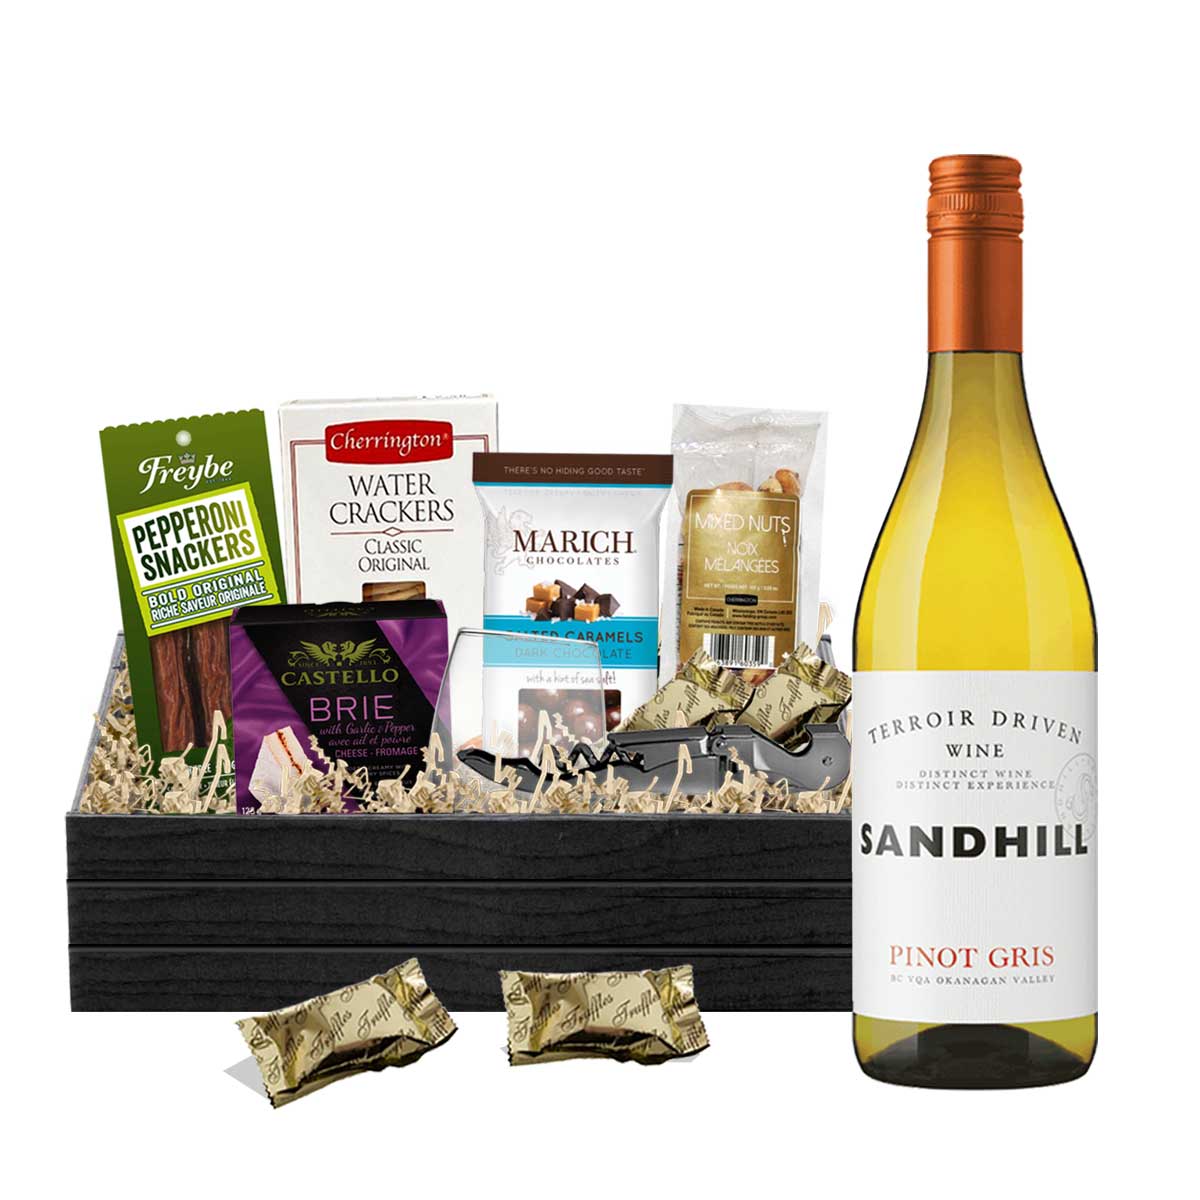 TAG Liquor Stores BC - Sand hill Pinot Gris 750ml Gift Basket